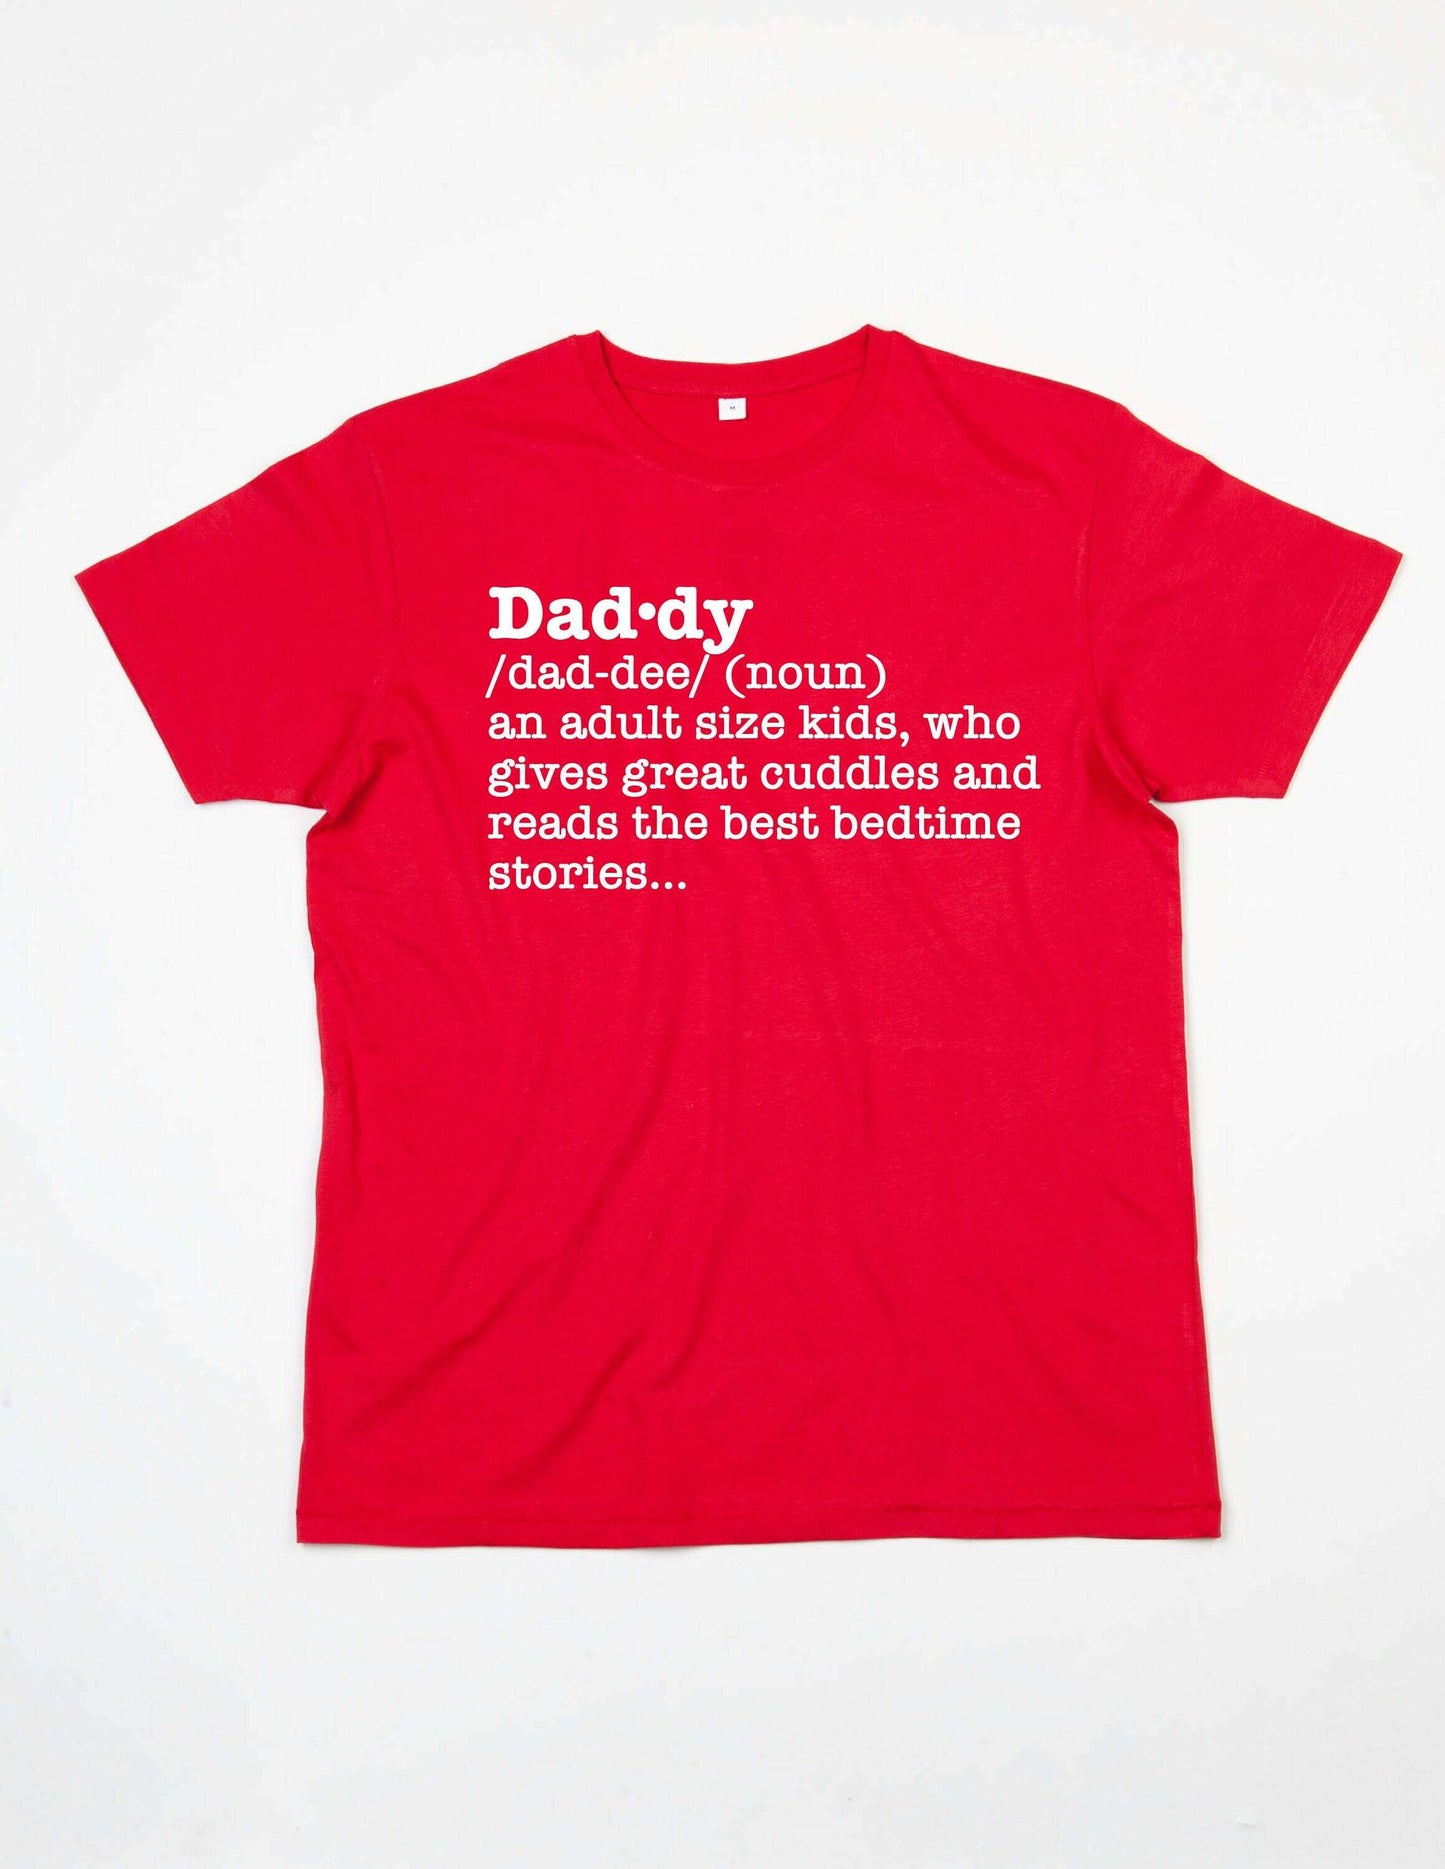 Daddy Definition shirt, fathers day funny dad shirt new dad t shirt